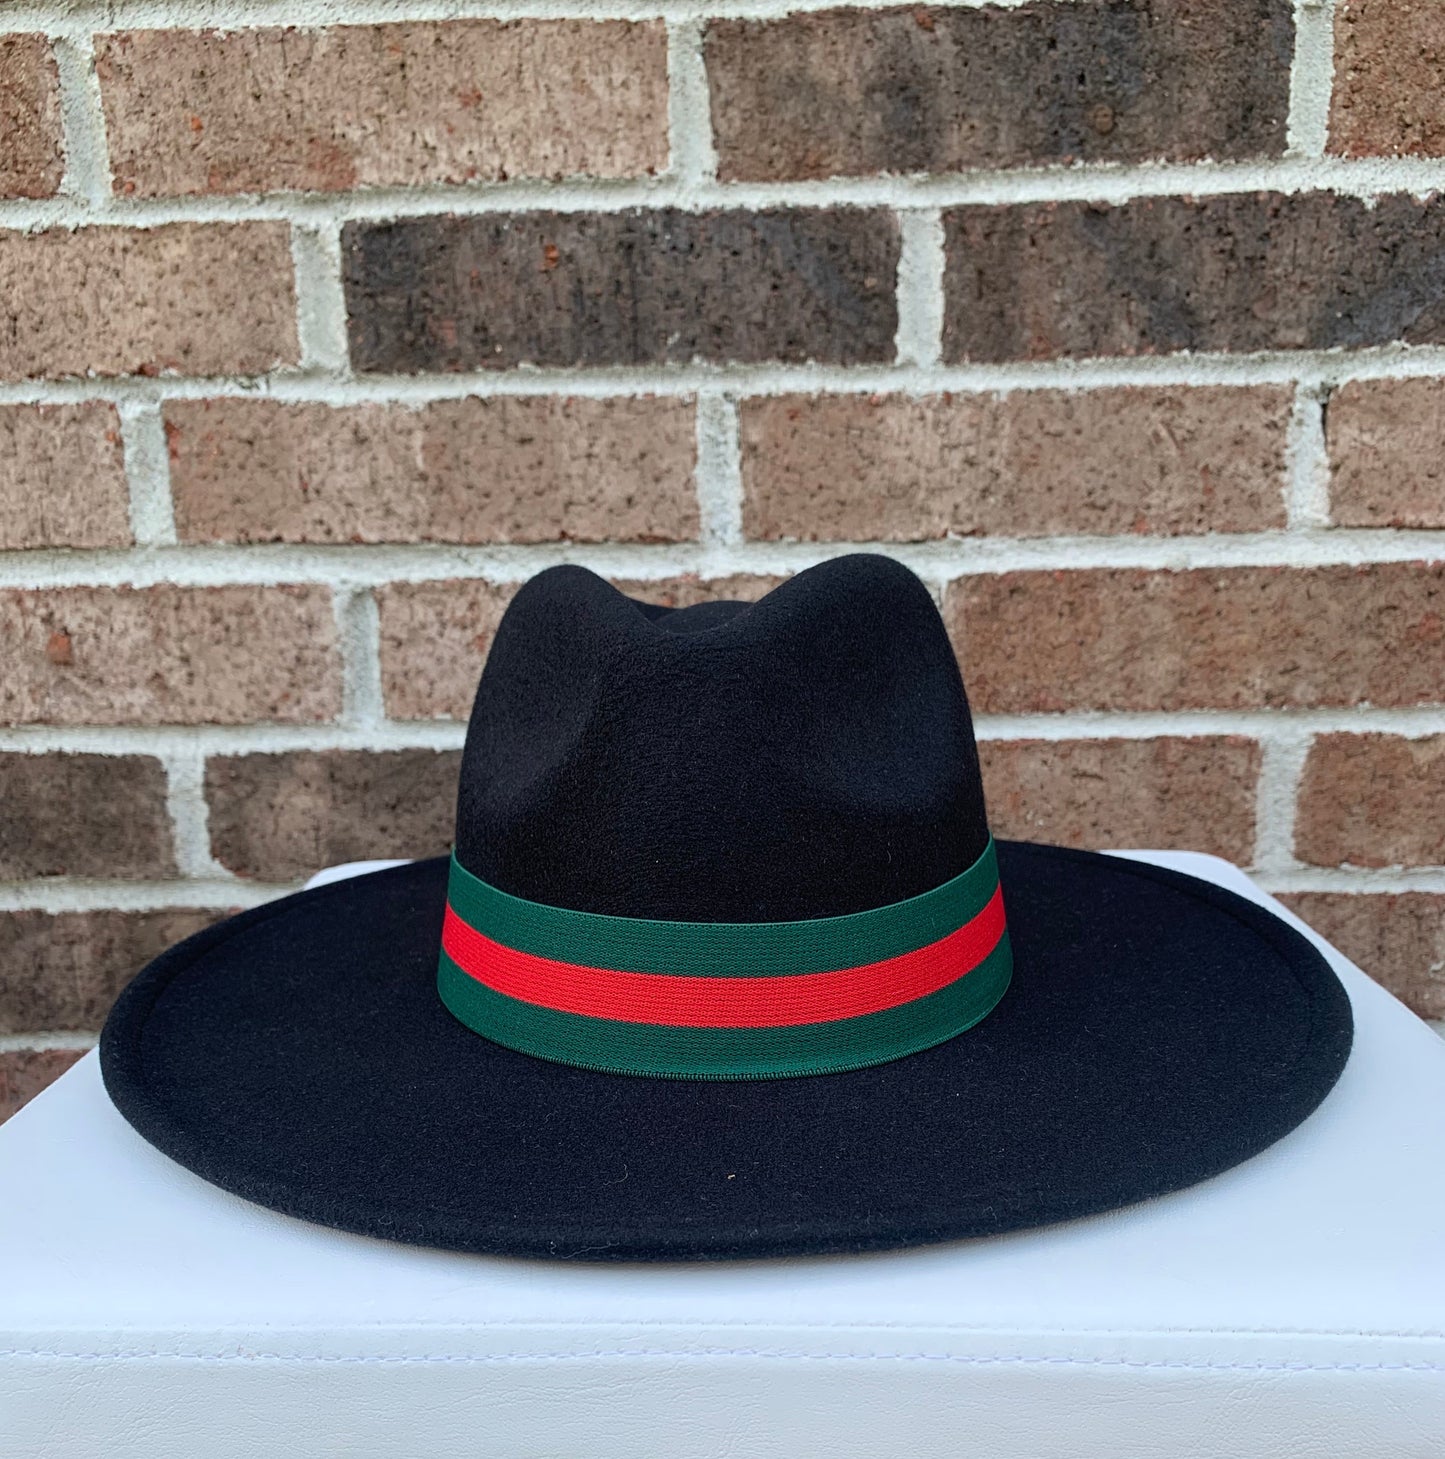 Hatbands green and red